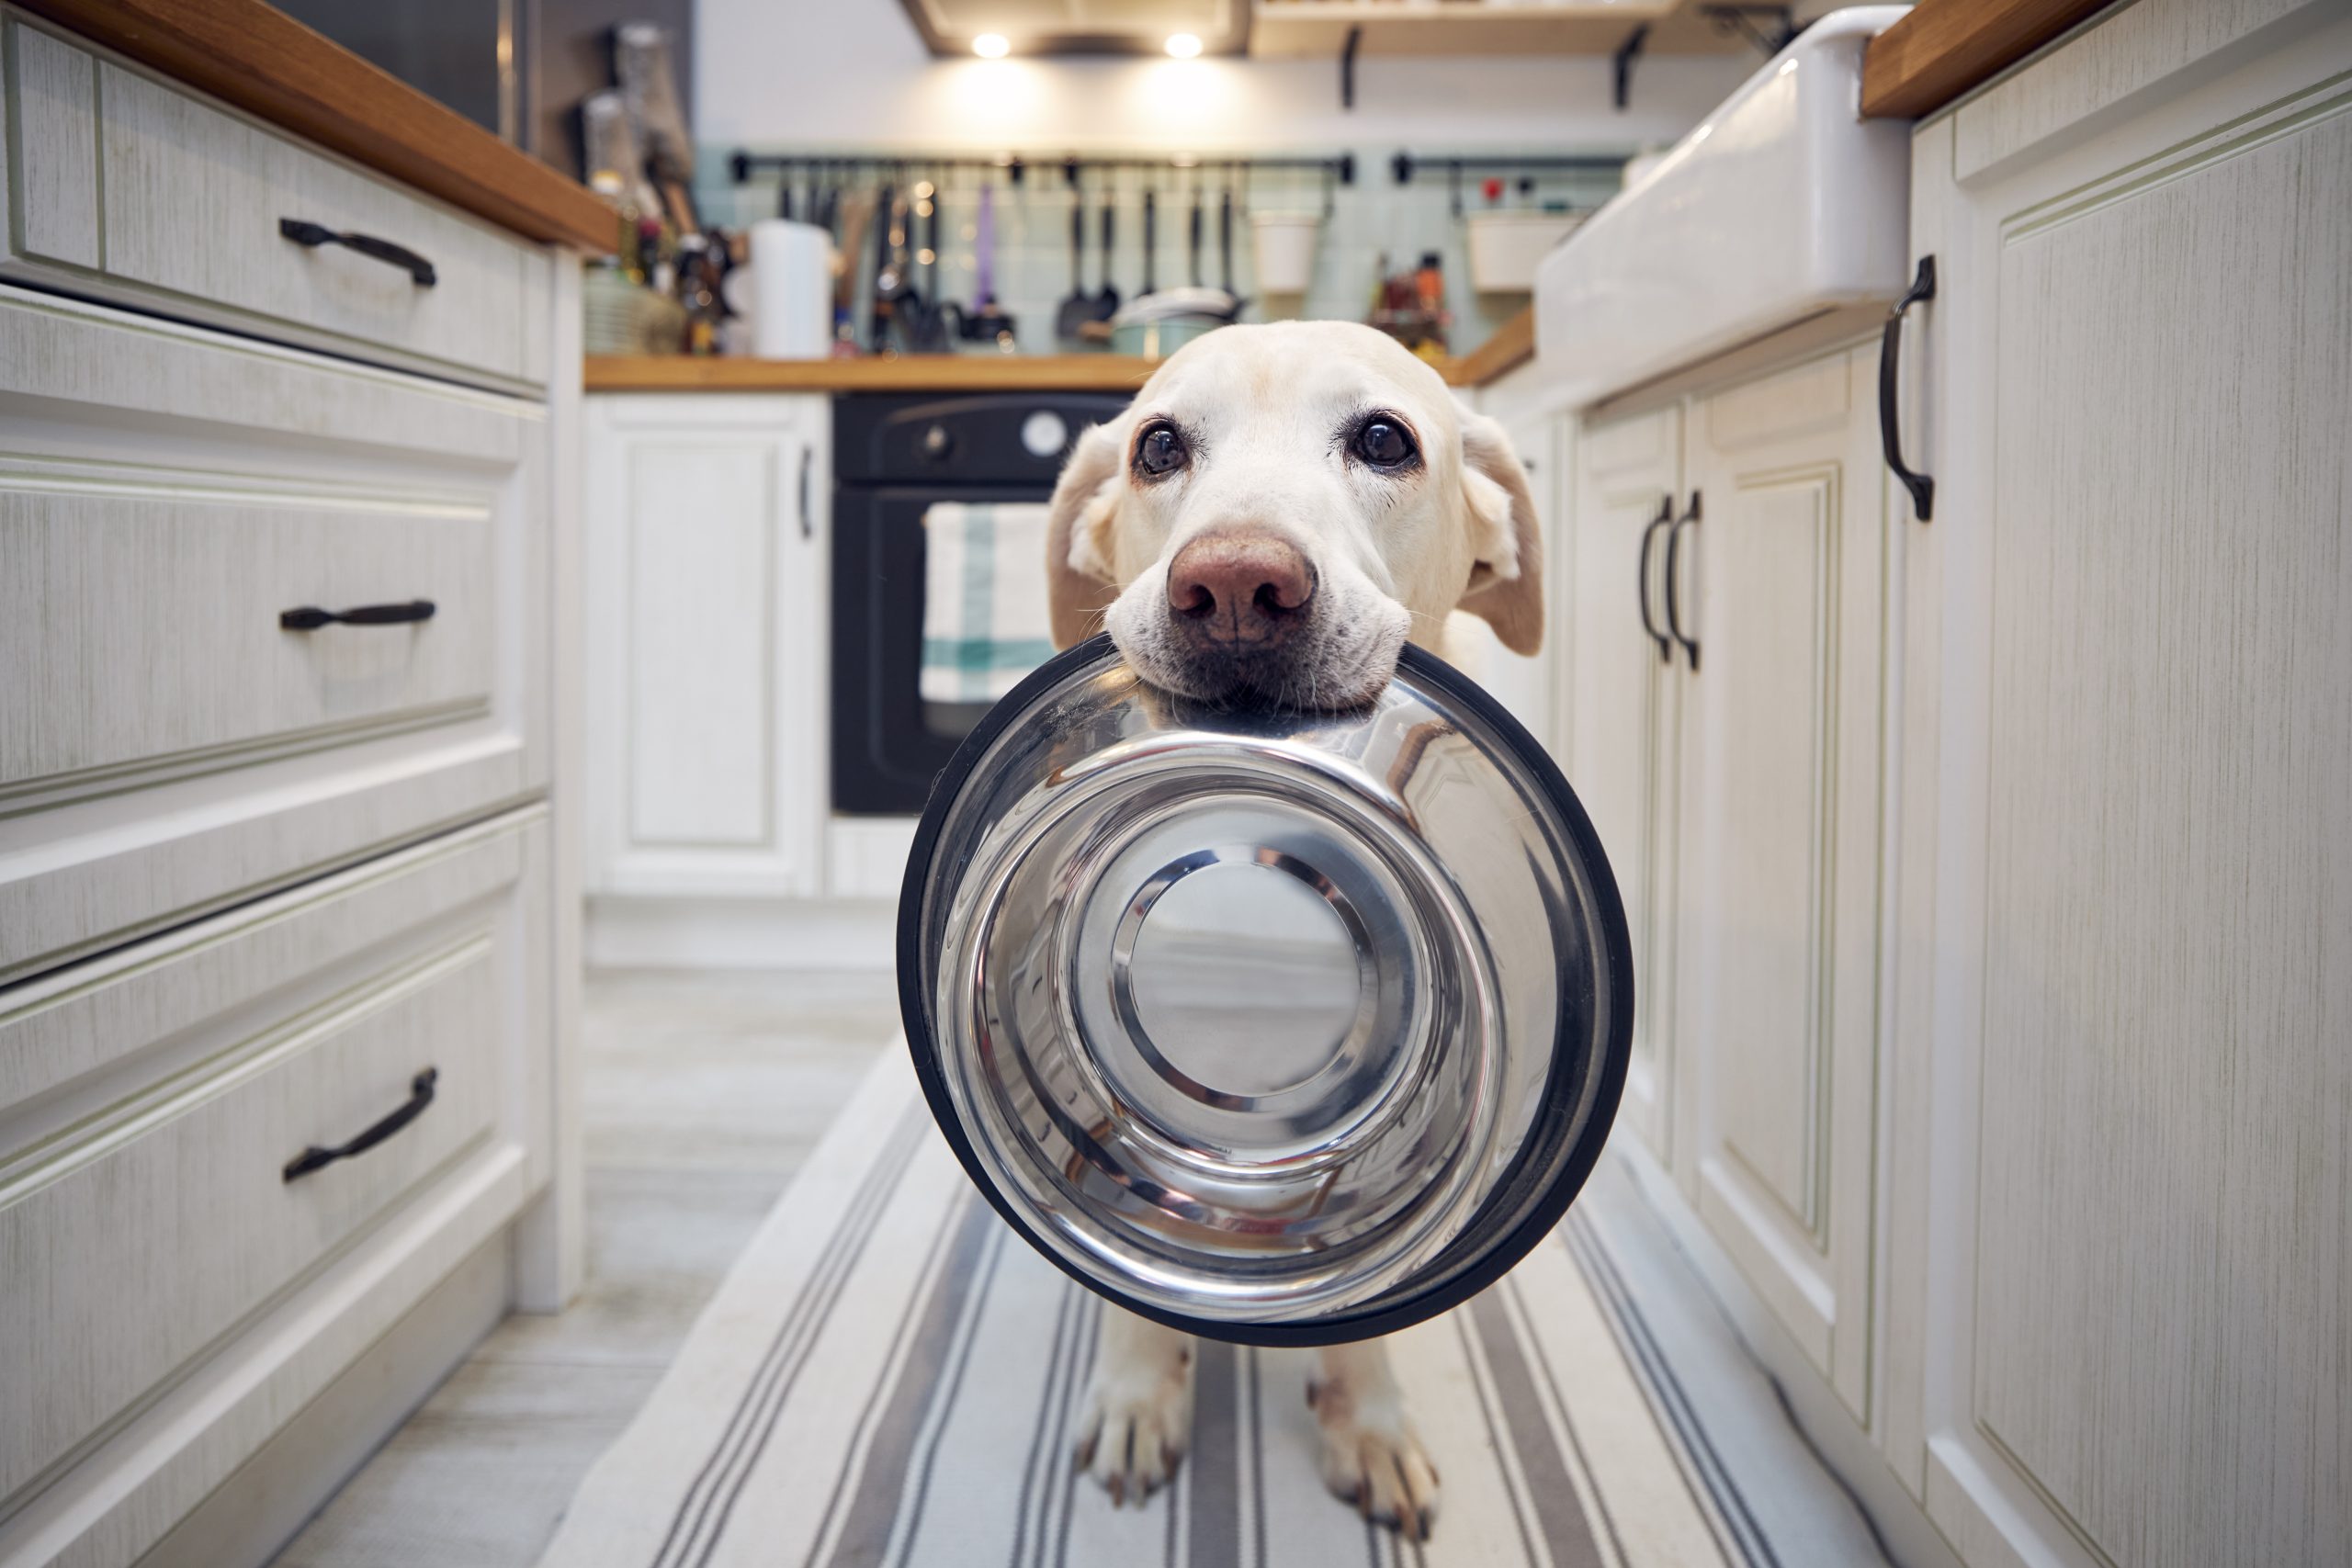 hungry dog waiting for food, selecting the right dog food, optimal nutrition every stage of life southpaw pet supply